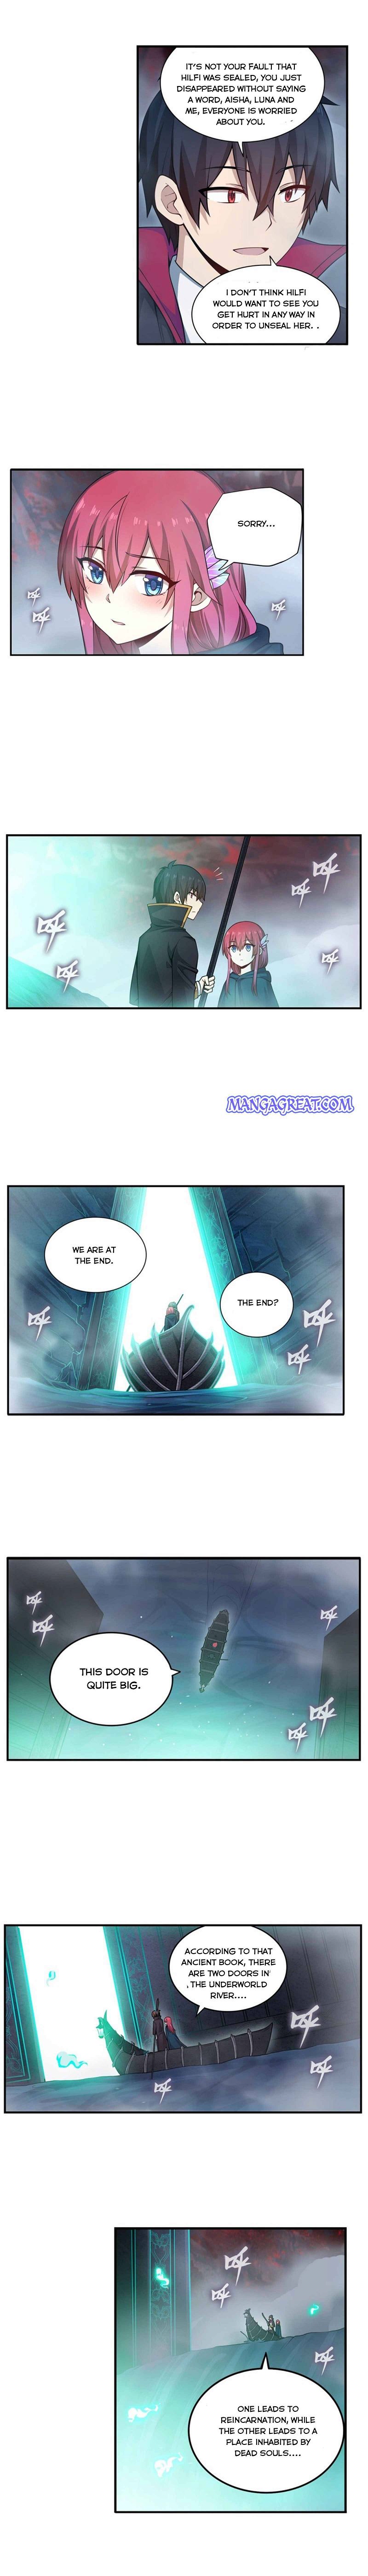 Infinite Apostles and Twelve War Girls Chapter 189 page 4